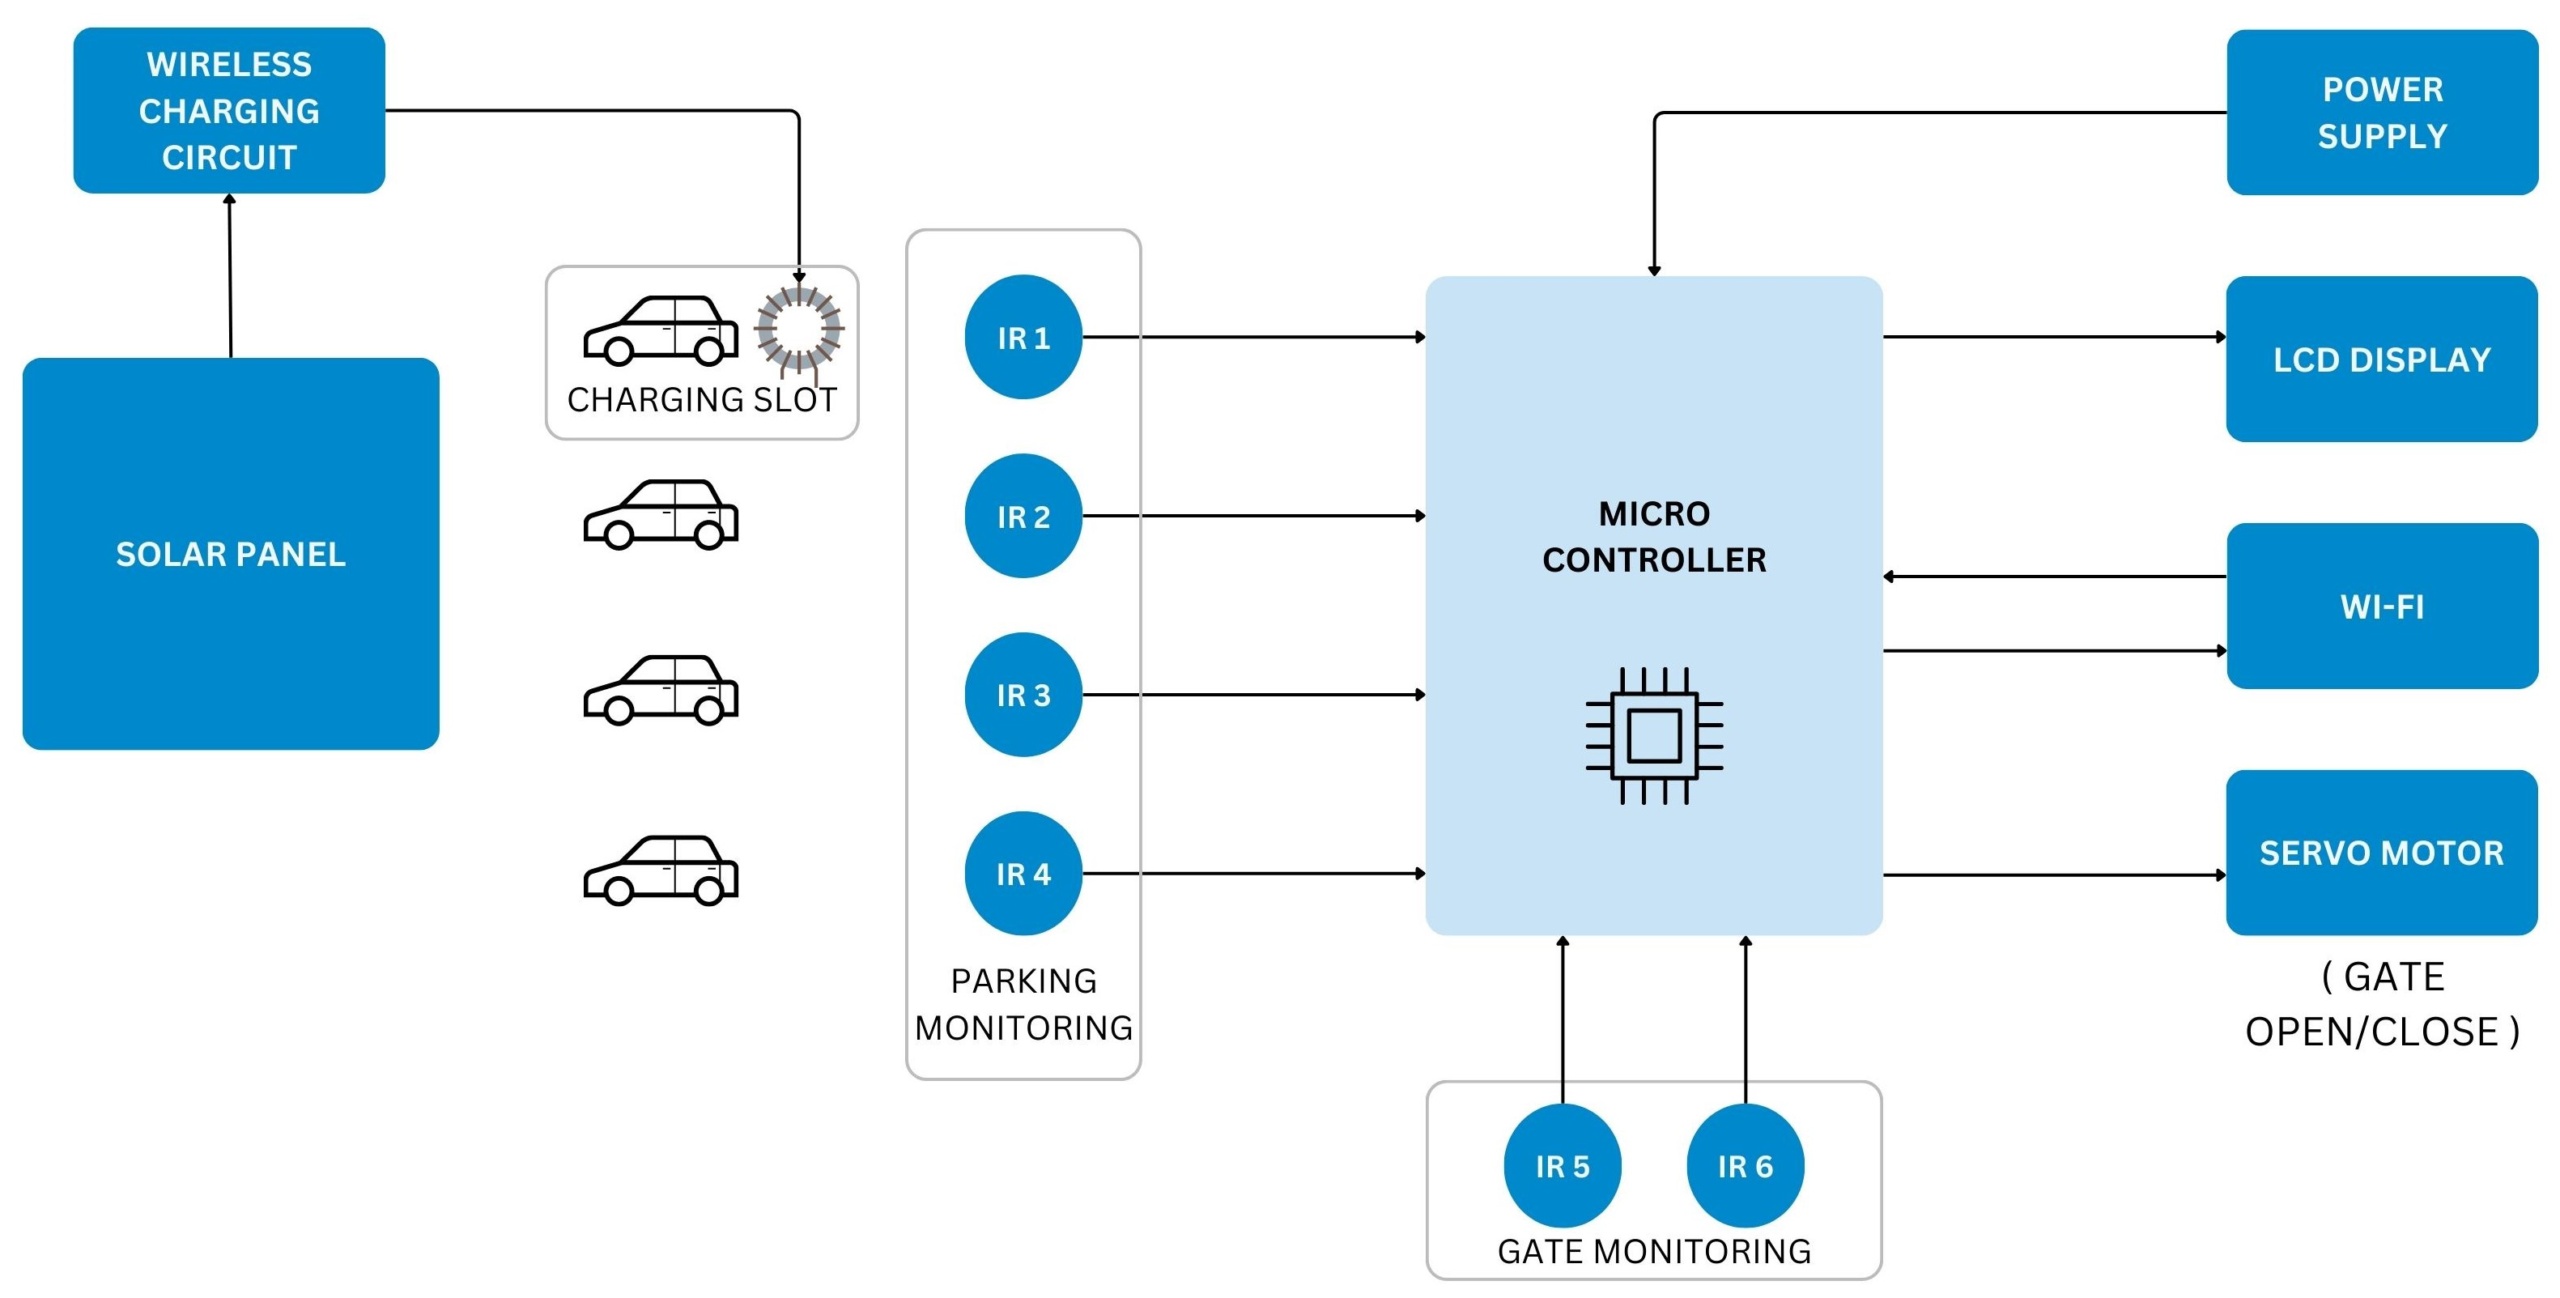 IOT BASED GREEN PARKING AND WIRELESS CHARGING WITH GATE